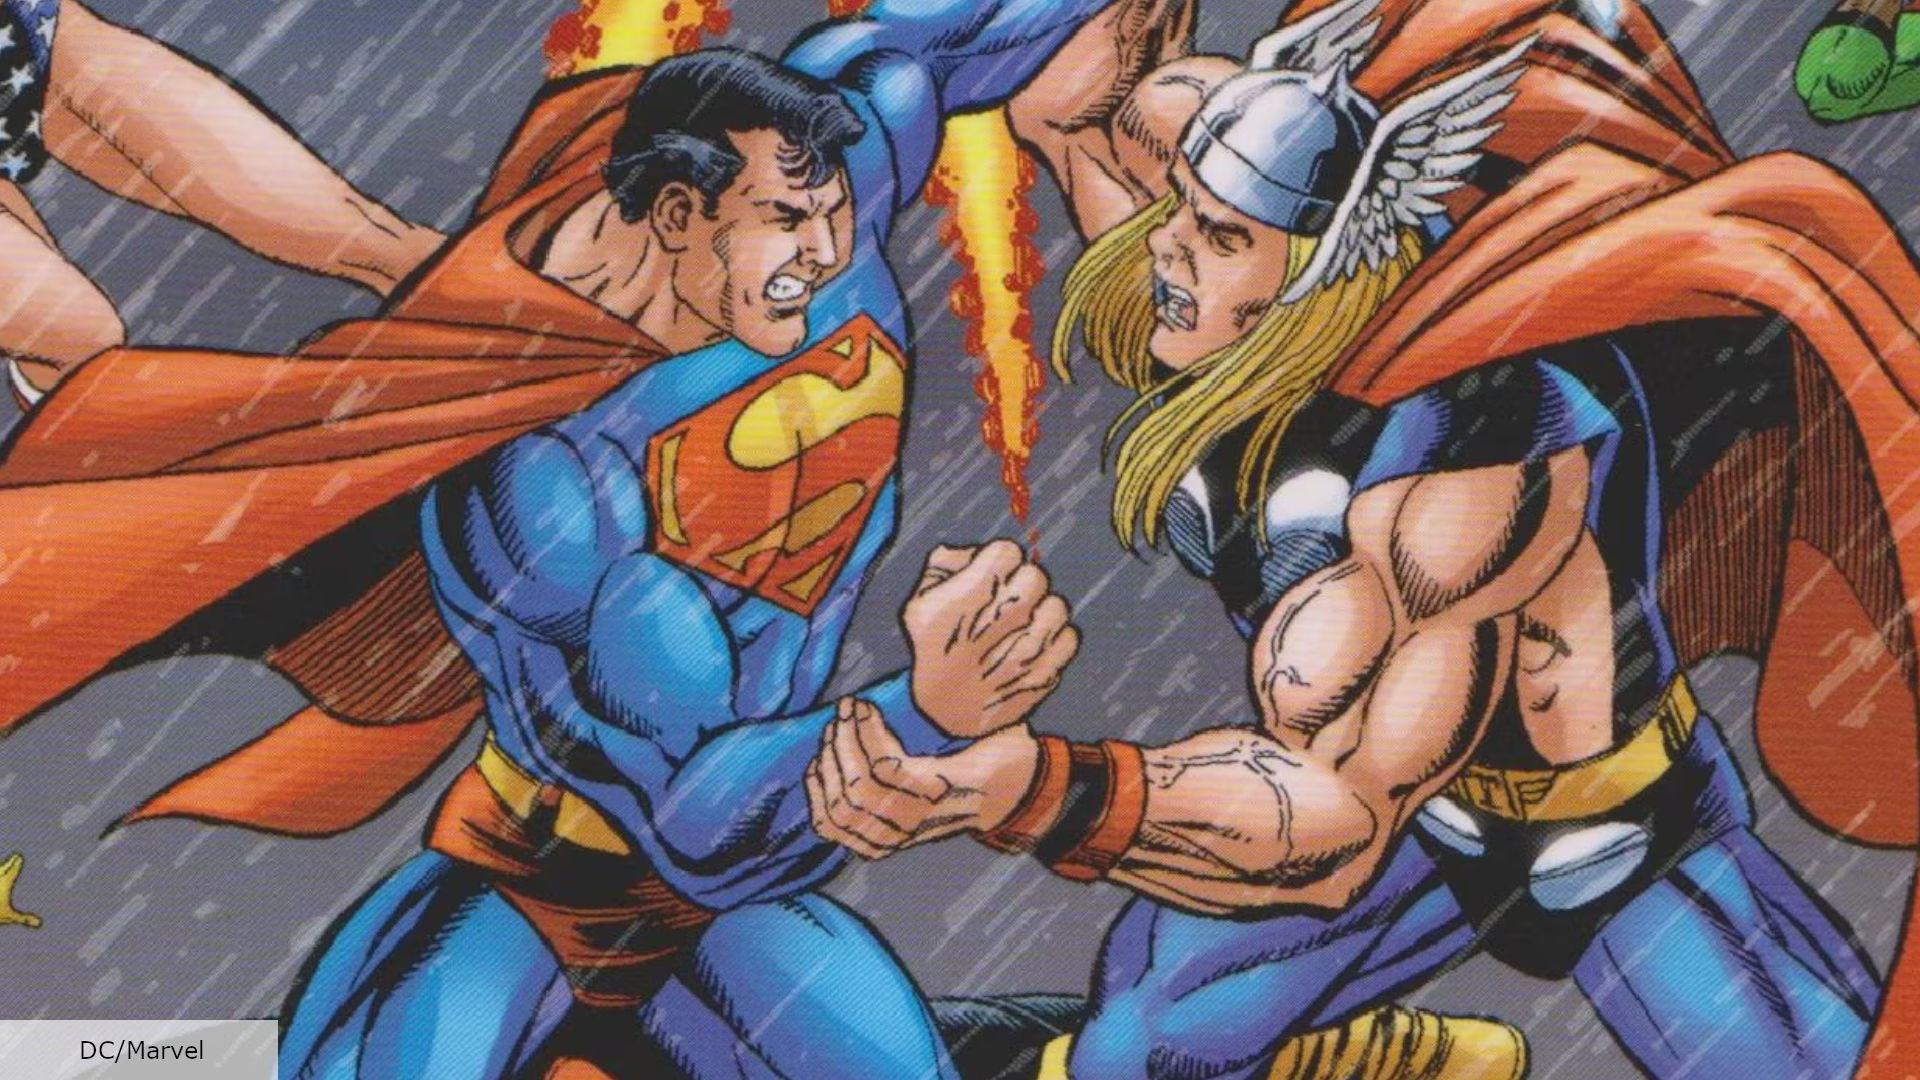 Superman vs Thor: Which superhero would win in a fight?. The Digital Fix